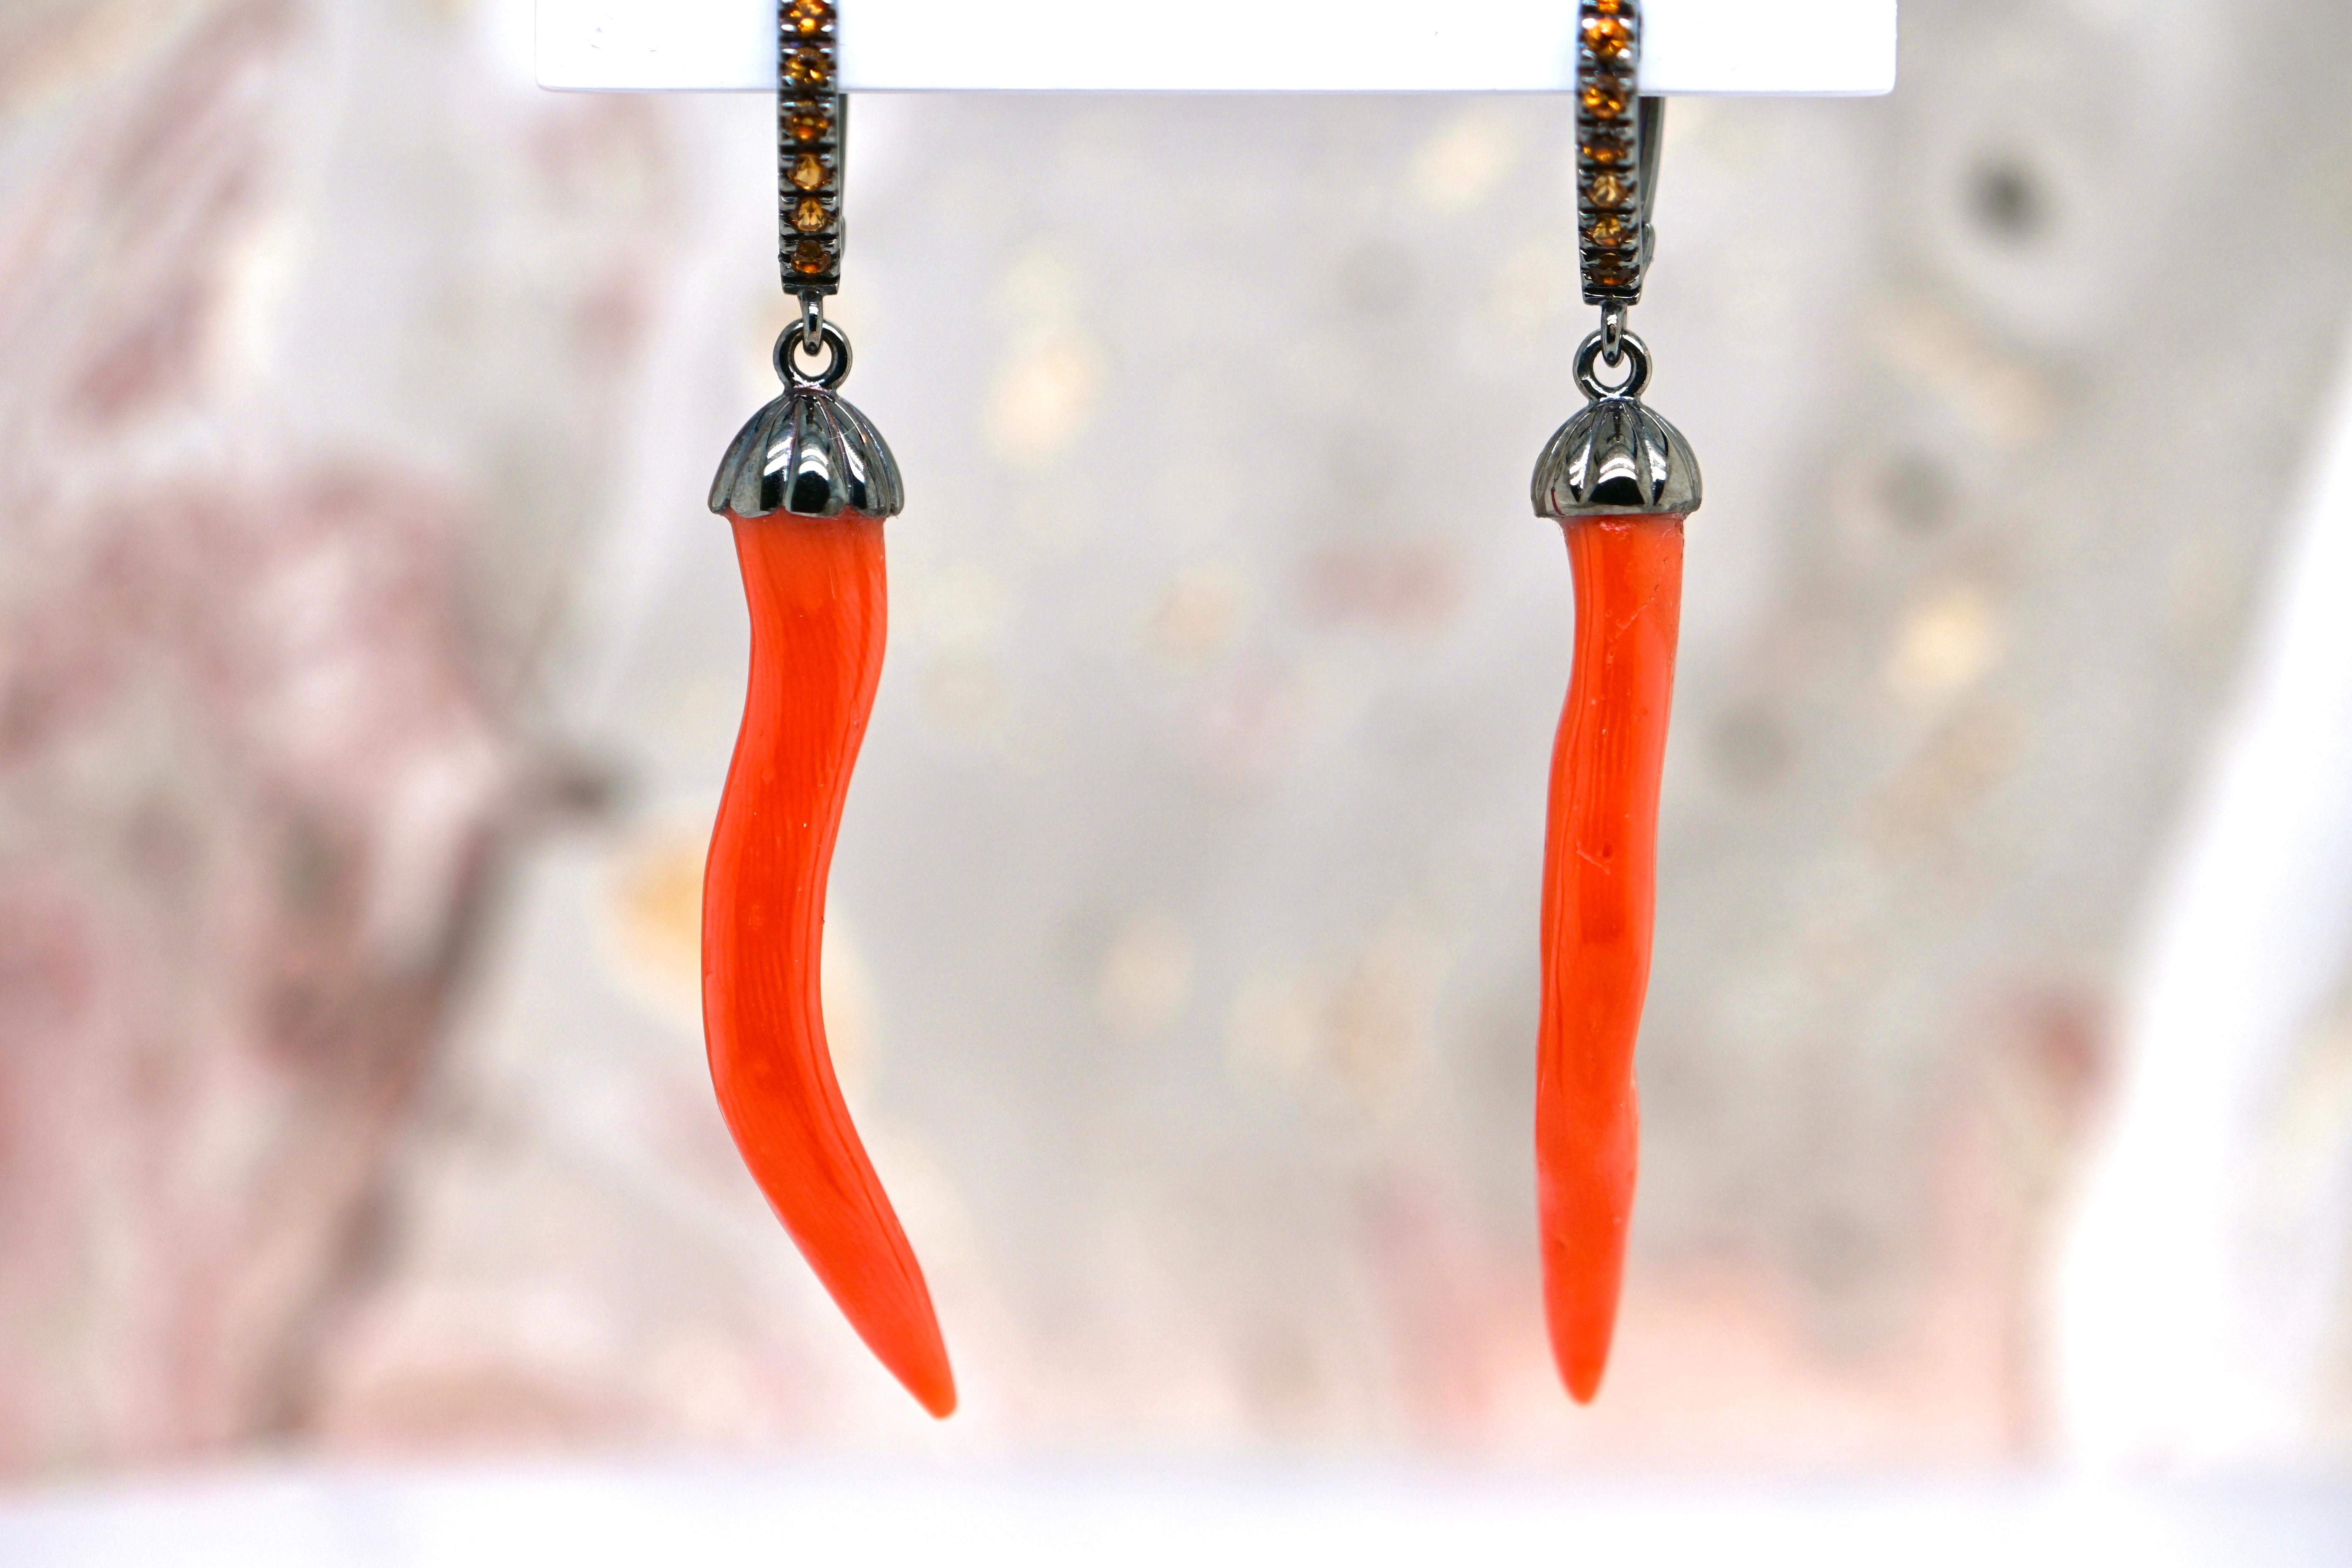 Coral, a symbol of beauty and femininity for centuries, is carefully selected for its vivid color and natural texture, adding a bewitching touch to these earrings.

Topaz adds a sparkling touch to the composition. Bewitchingly orange, these precious